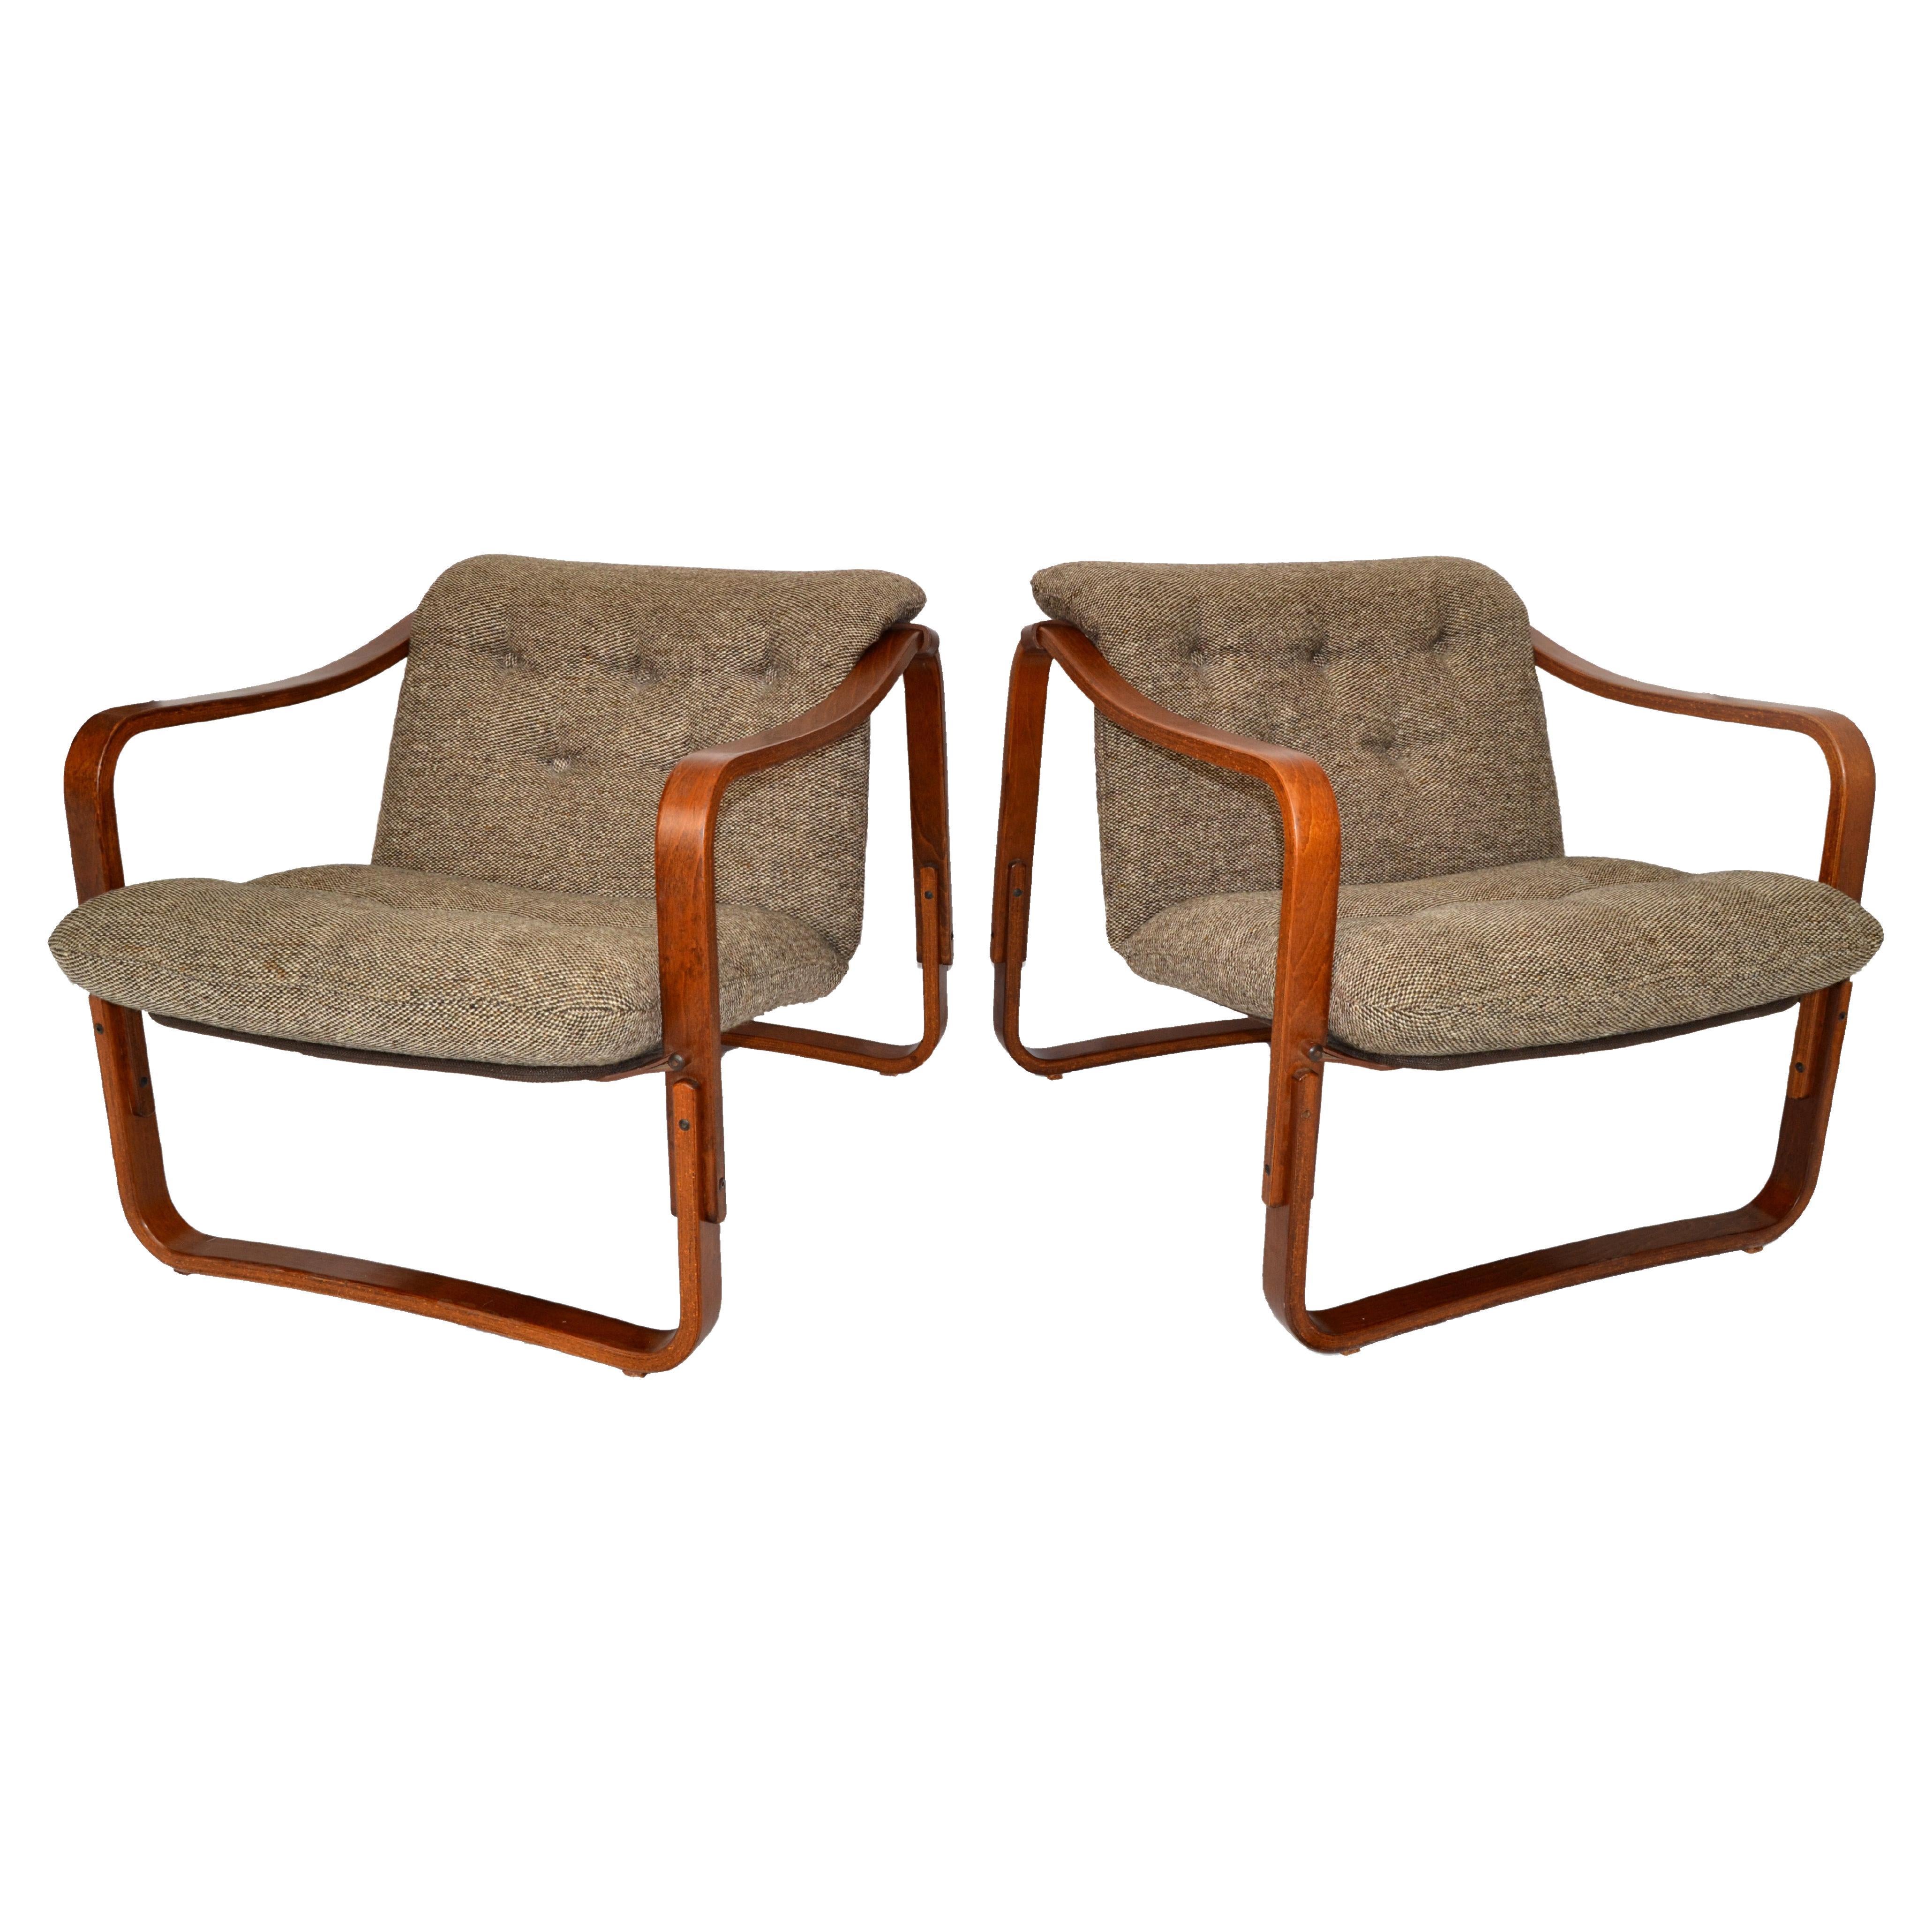 Pair of rare Ingmar Relling Scandinavian Modern Teak Bentwood lounge chairs with Leather Bindings and the original loose Wool Mix Upholstered Seat Cushions.
All handcrafted in the 1960s and made in Scandinavian.
The Condition is good vintage with